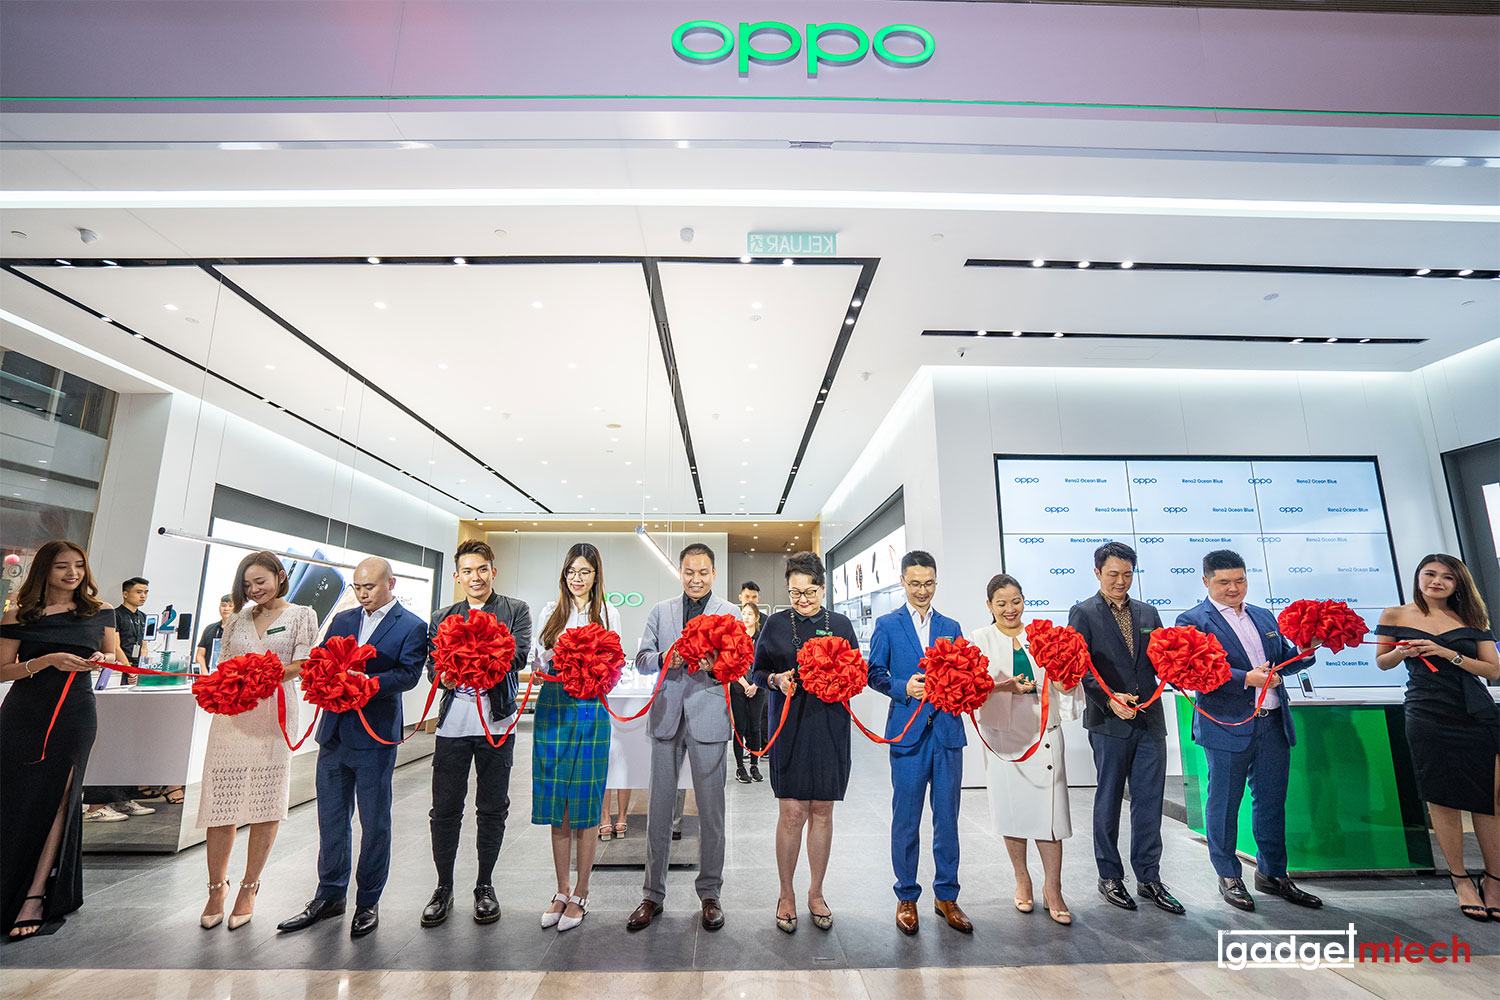 OPPO Pavilion KL Flagship Store Now Opens!